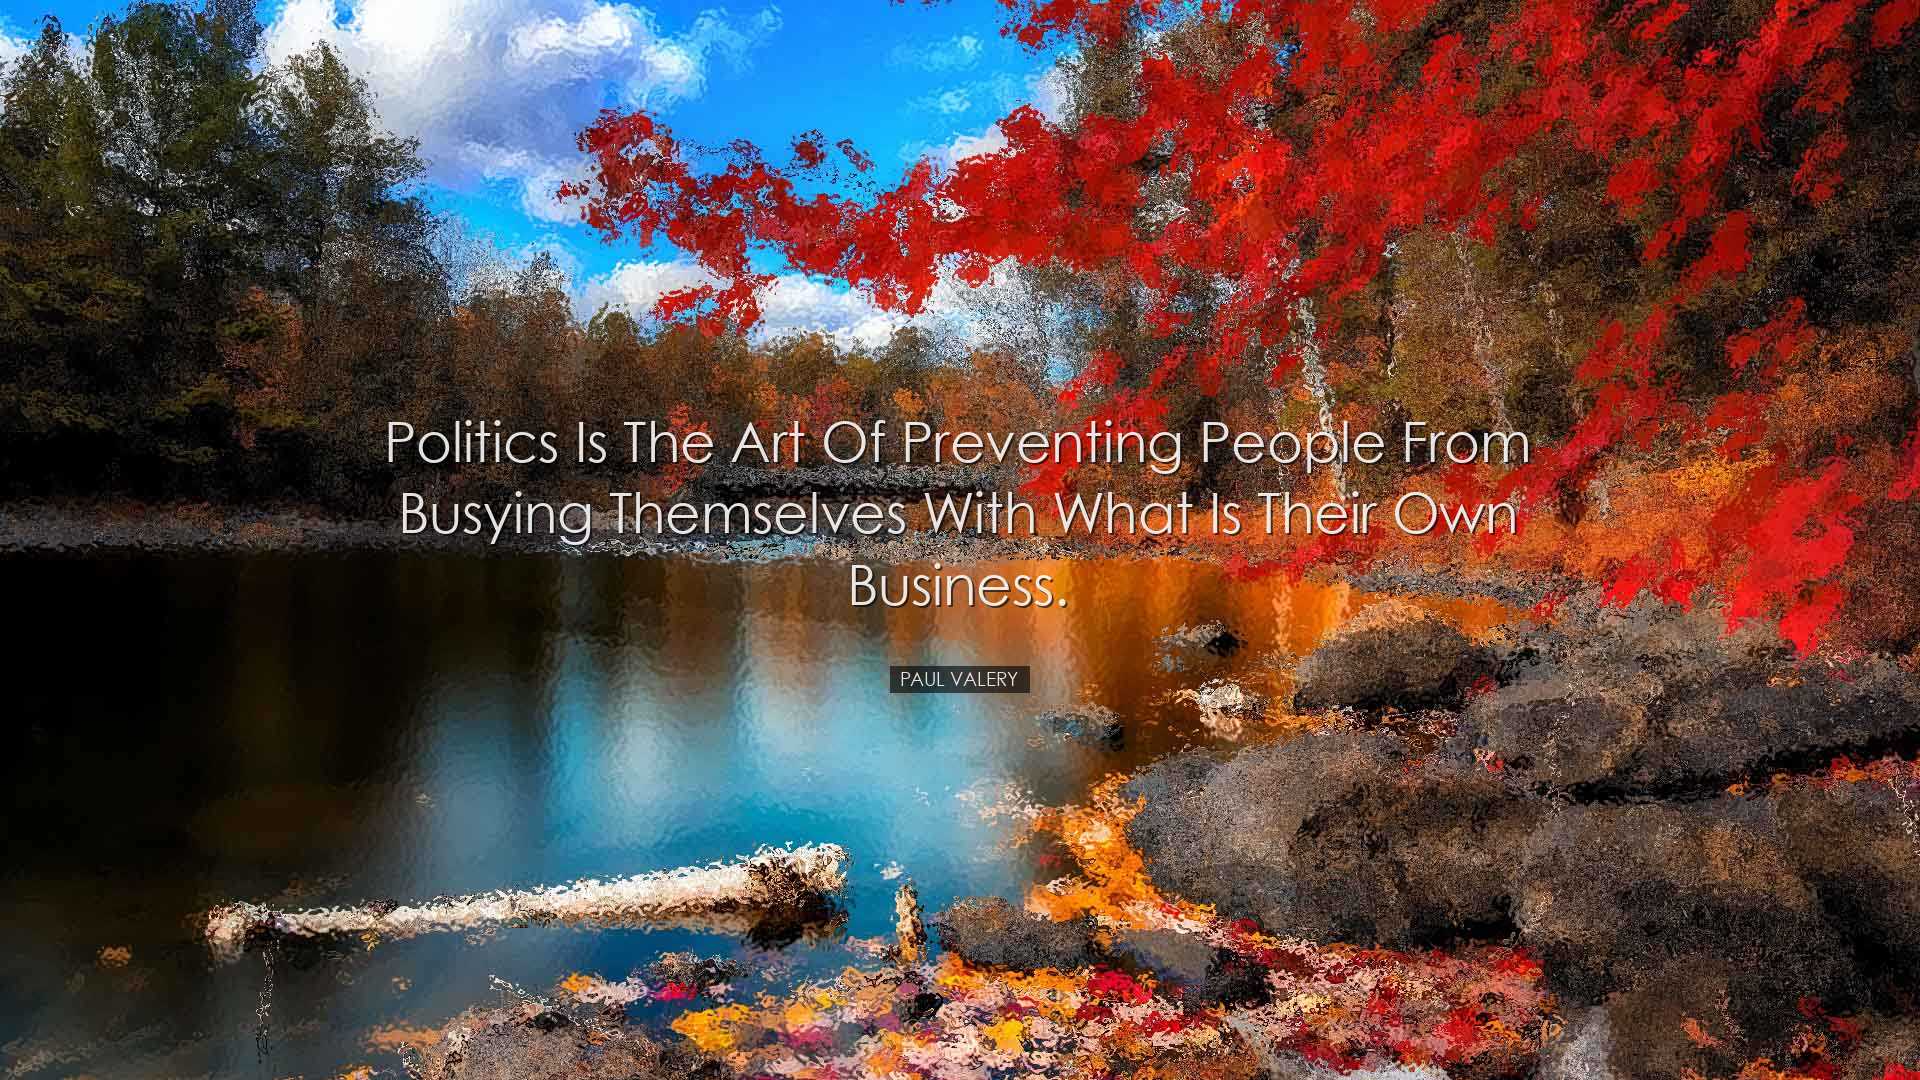 Politics is the art of preventing people from busying themselves w